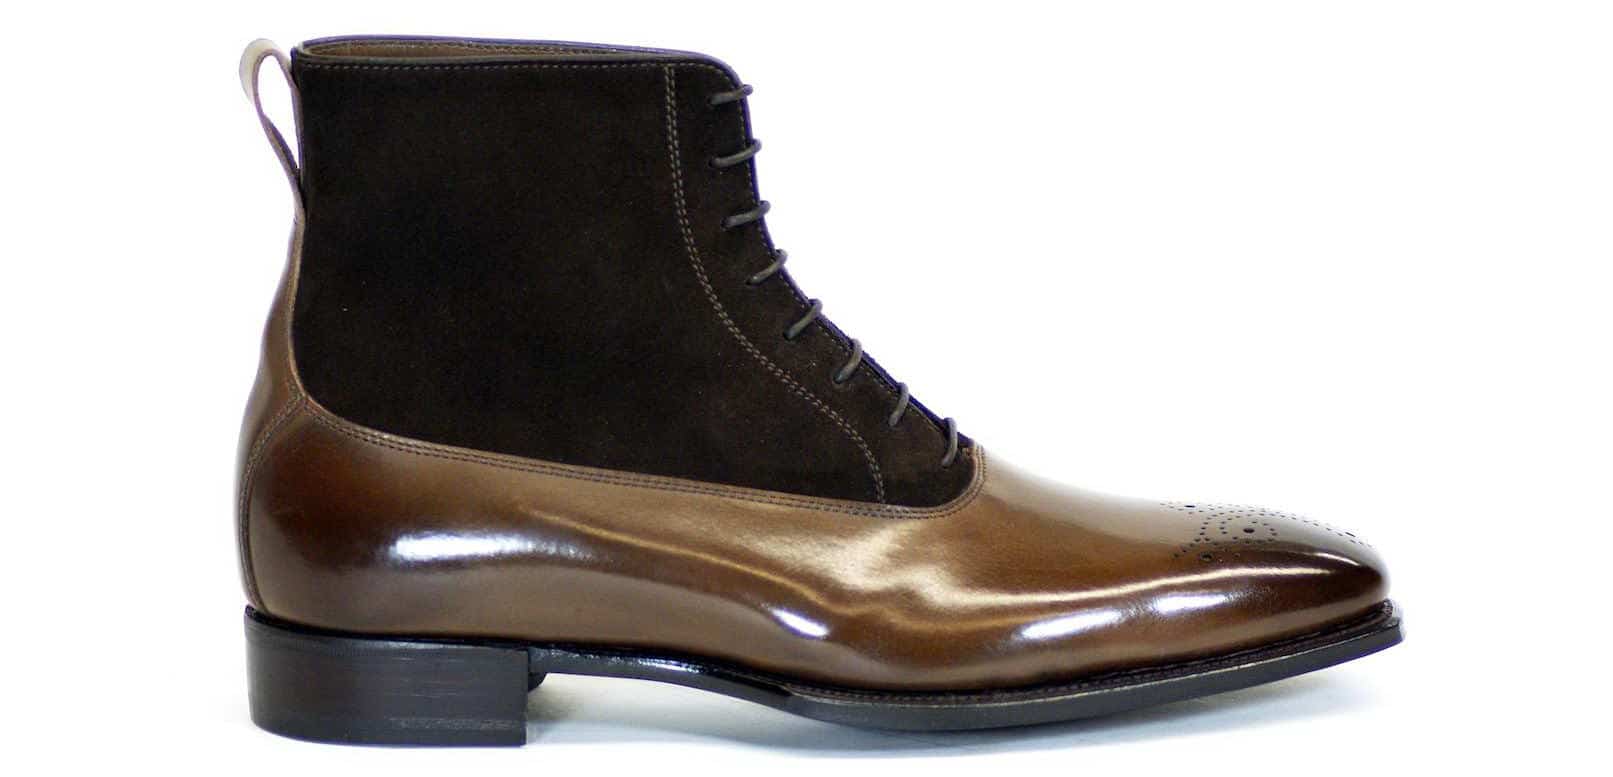 balmoral boots with suit